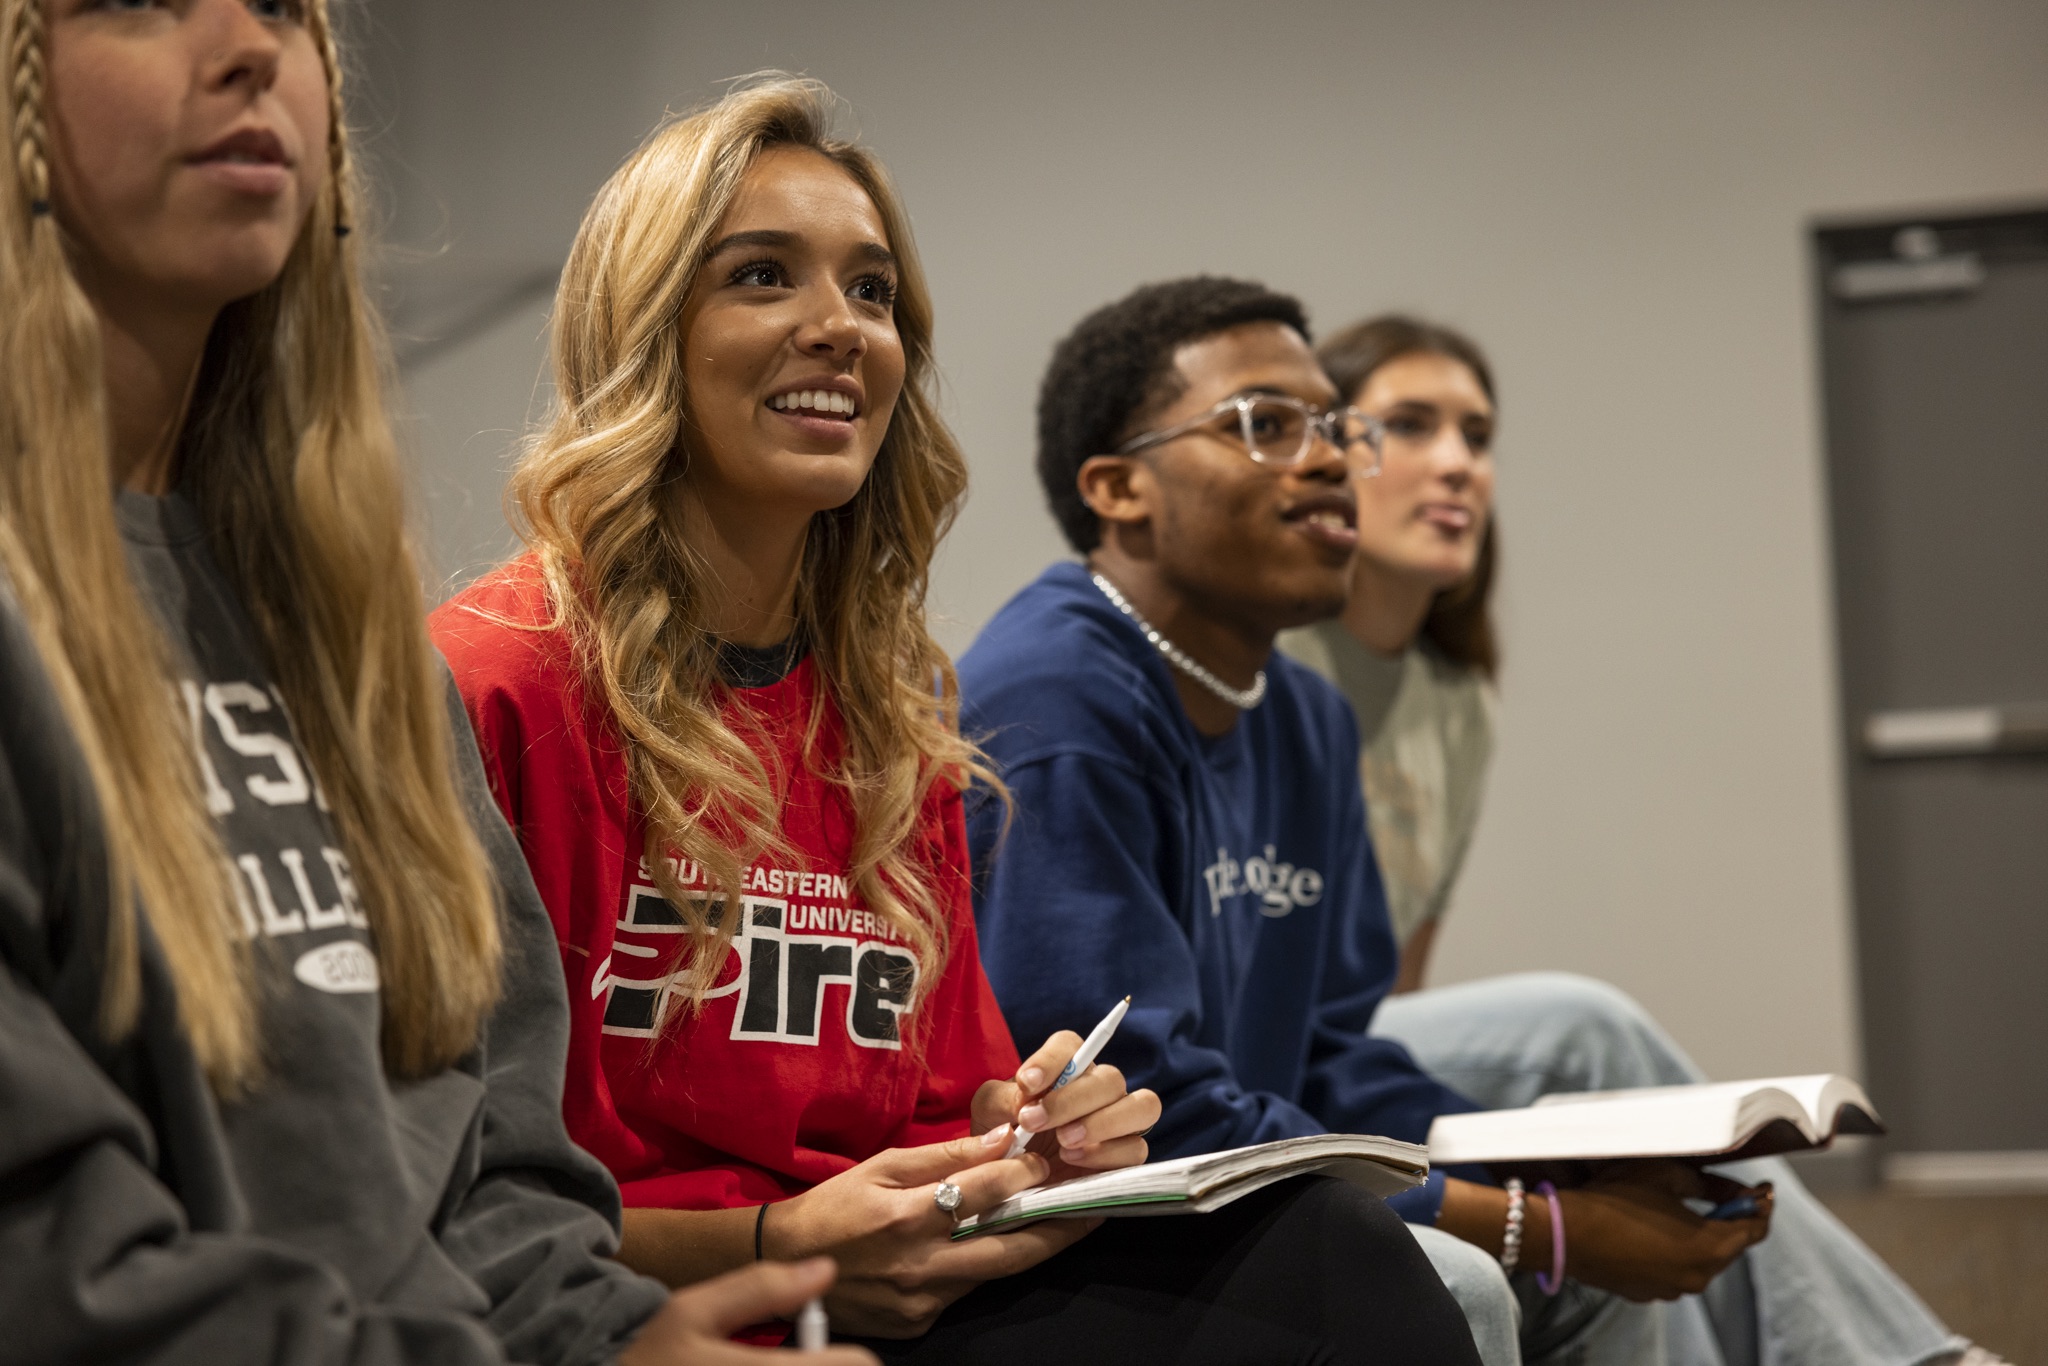 Student smiling while in lecture wearing red SEU crewneck